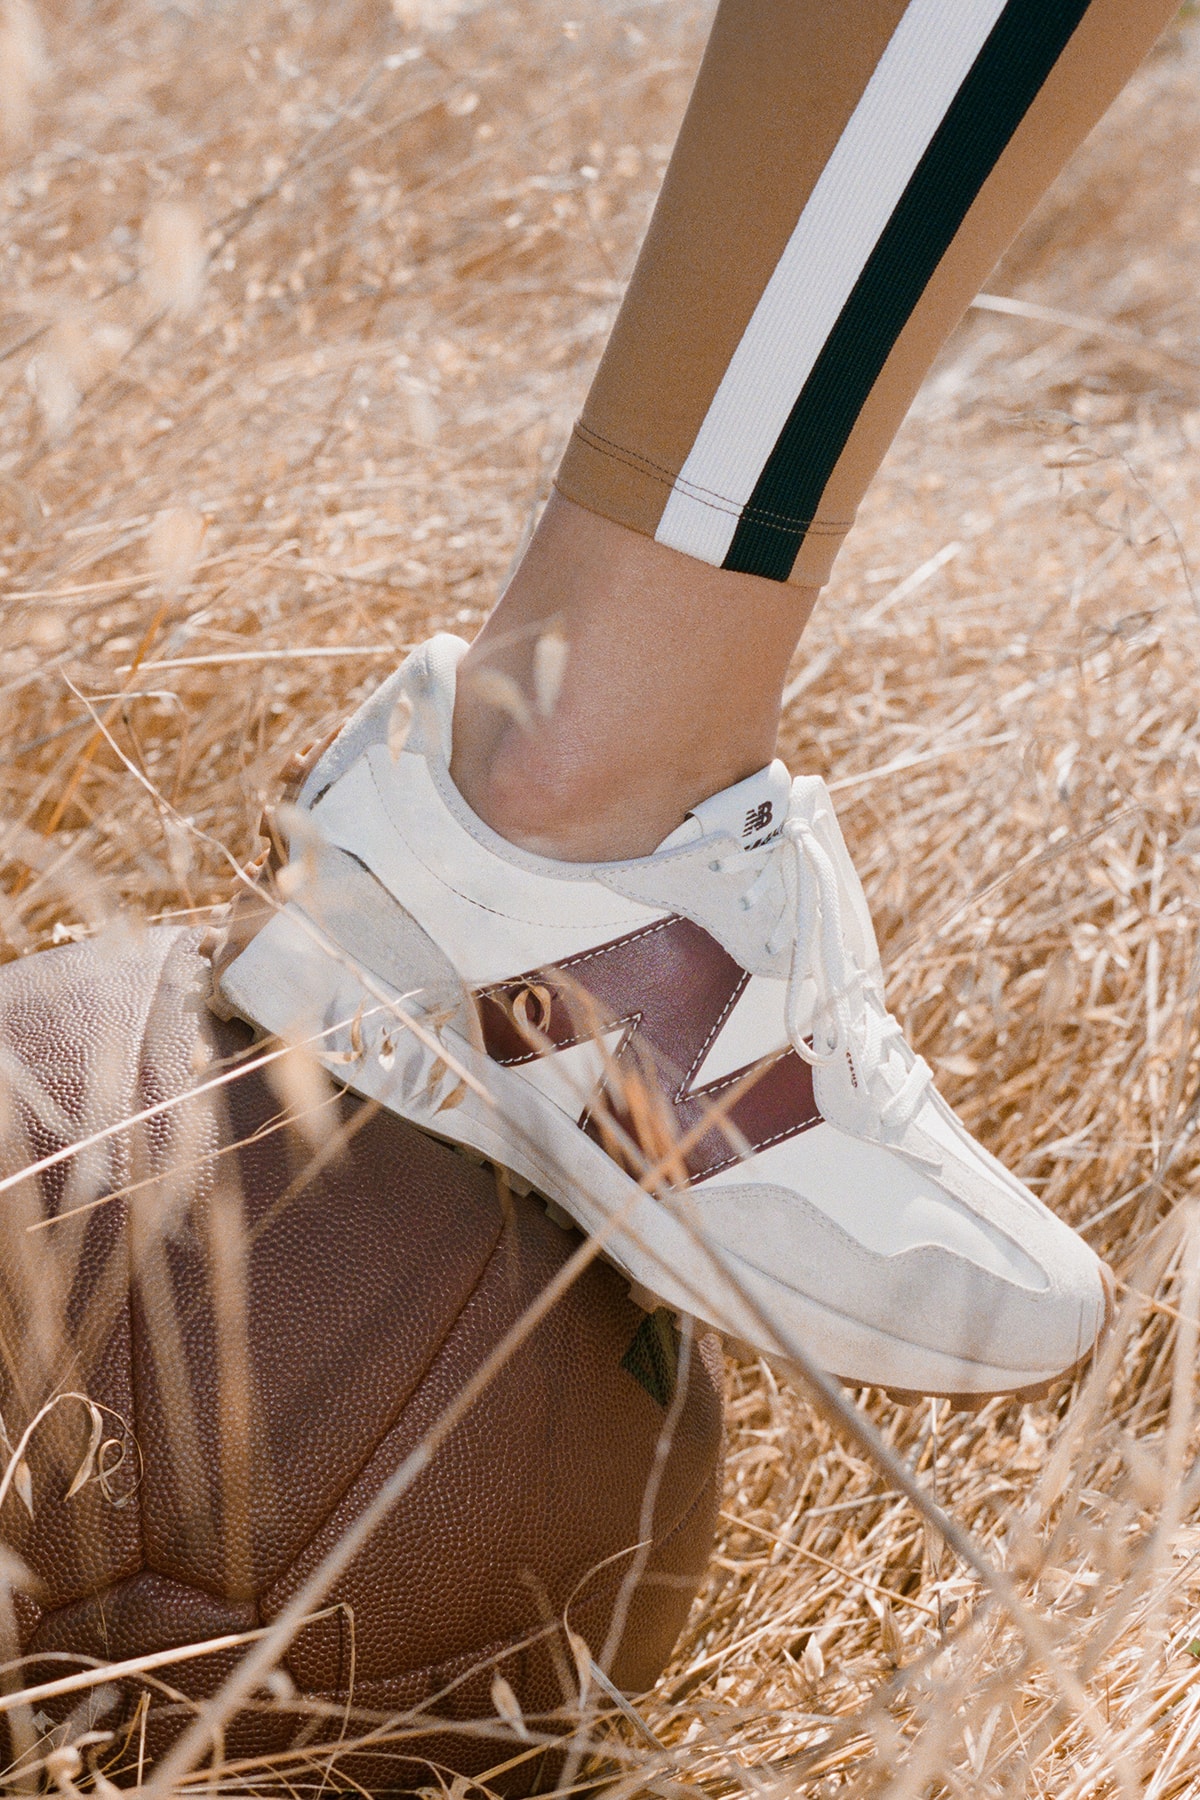 STAUD x New Balance Activewear Collaboration Collection 327 Sneaker